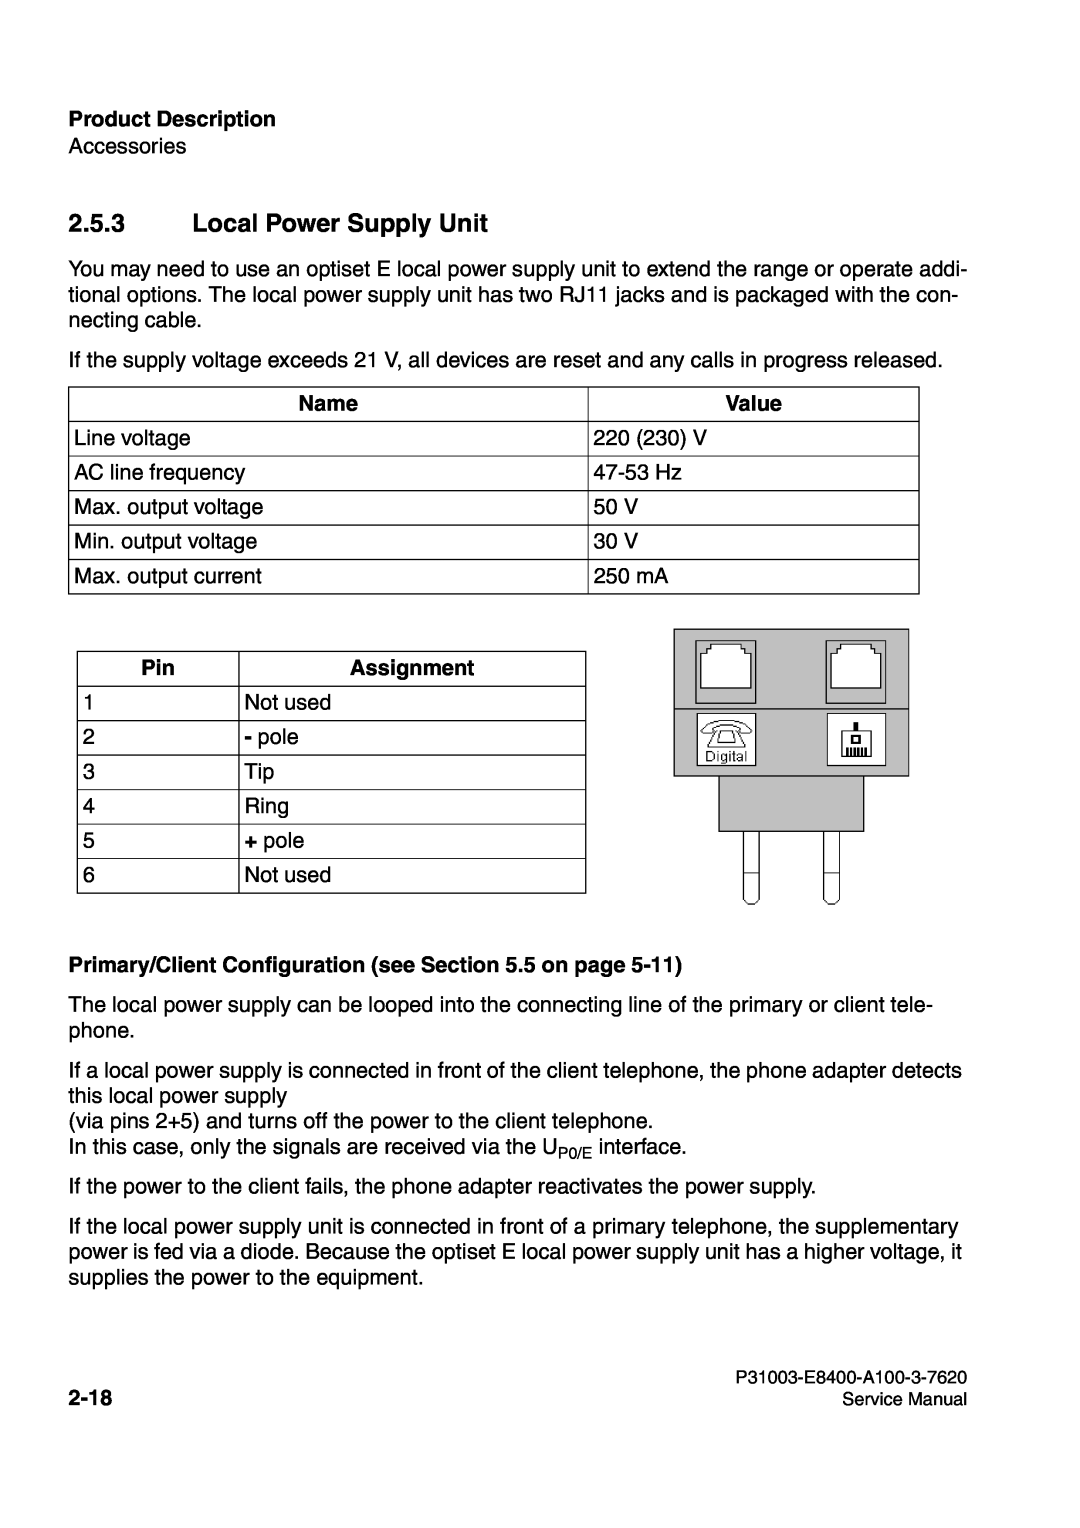 Siemens 500 service manual Local Power Supply Unit, Product Description, Name, Value, Assignment, 2-18 